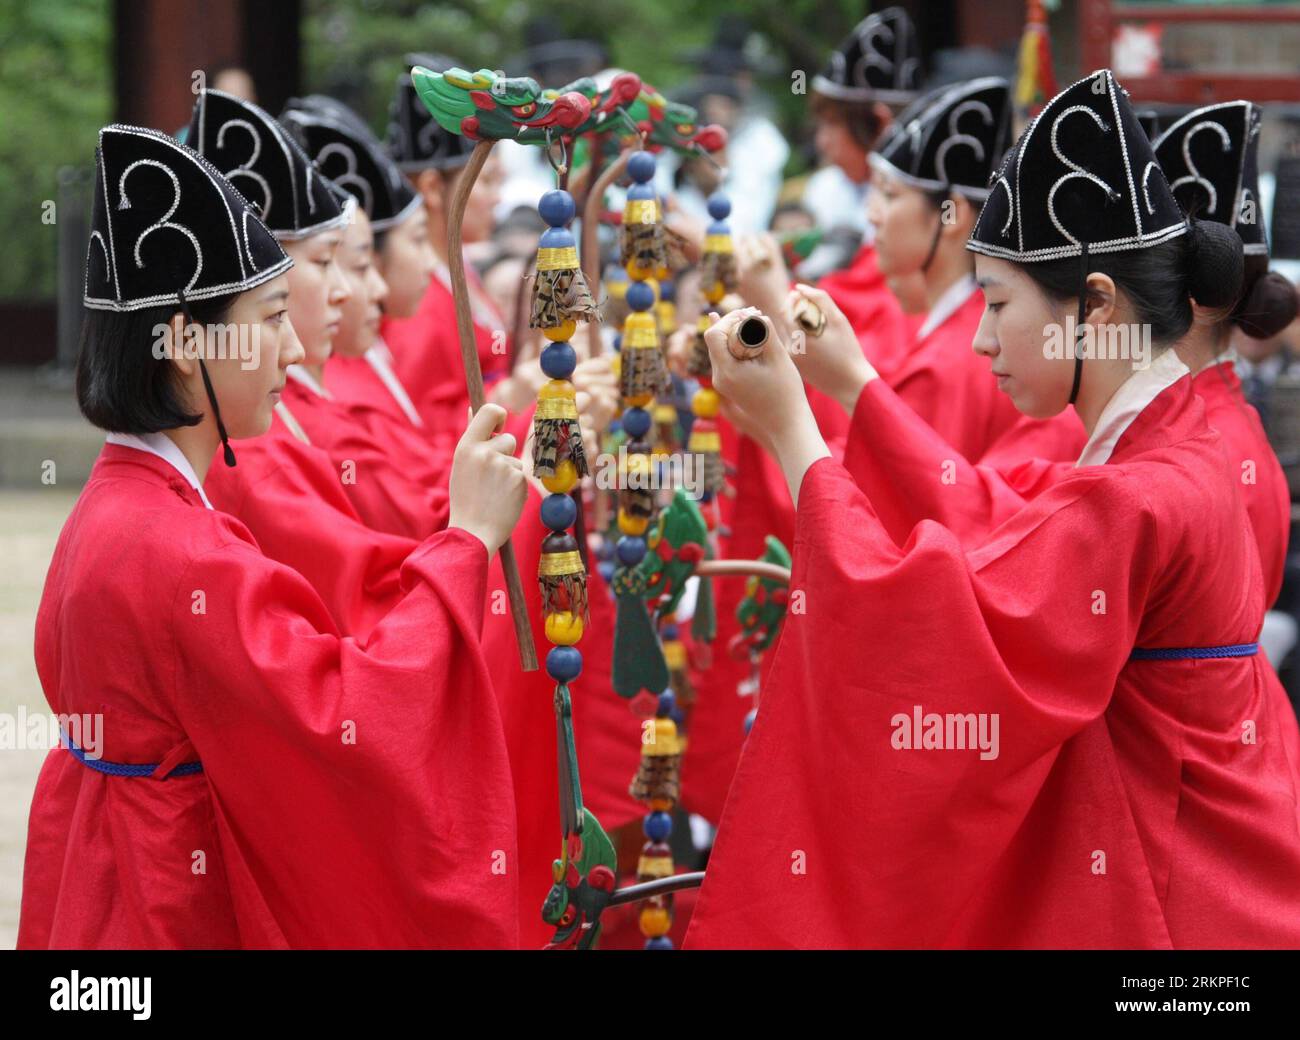 Bildnummer: 57979826  Datum: 11.05.2012  Copyright: imago/Xinhua (120511) -- SEOUL, May 11, 2012 (Xinhua) -- College students wearing traditional costumes perform traditional ritual at a Confucian shrine in Seoul, South Korea, May 11, 2012. The Confucius ritual is staged twice a year at the Confucian Shrine at Sungkyunkwan University in Seoul, which was built during the Joseon Dynasty in 1398 for Korean Confucian scholars to honor Confucius. (Xinhua/Park Jin-hee) SOUTH KOREA-SEOUL-CONFUCIUS RITUAL PUBLICATIONxNOTxINxCHN Gesellschaft xda x2x 2012 quer  o0 Konfuzianismus Tradition Bildung Uni St Stock Photo